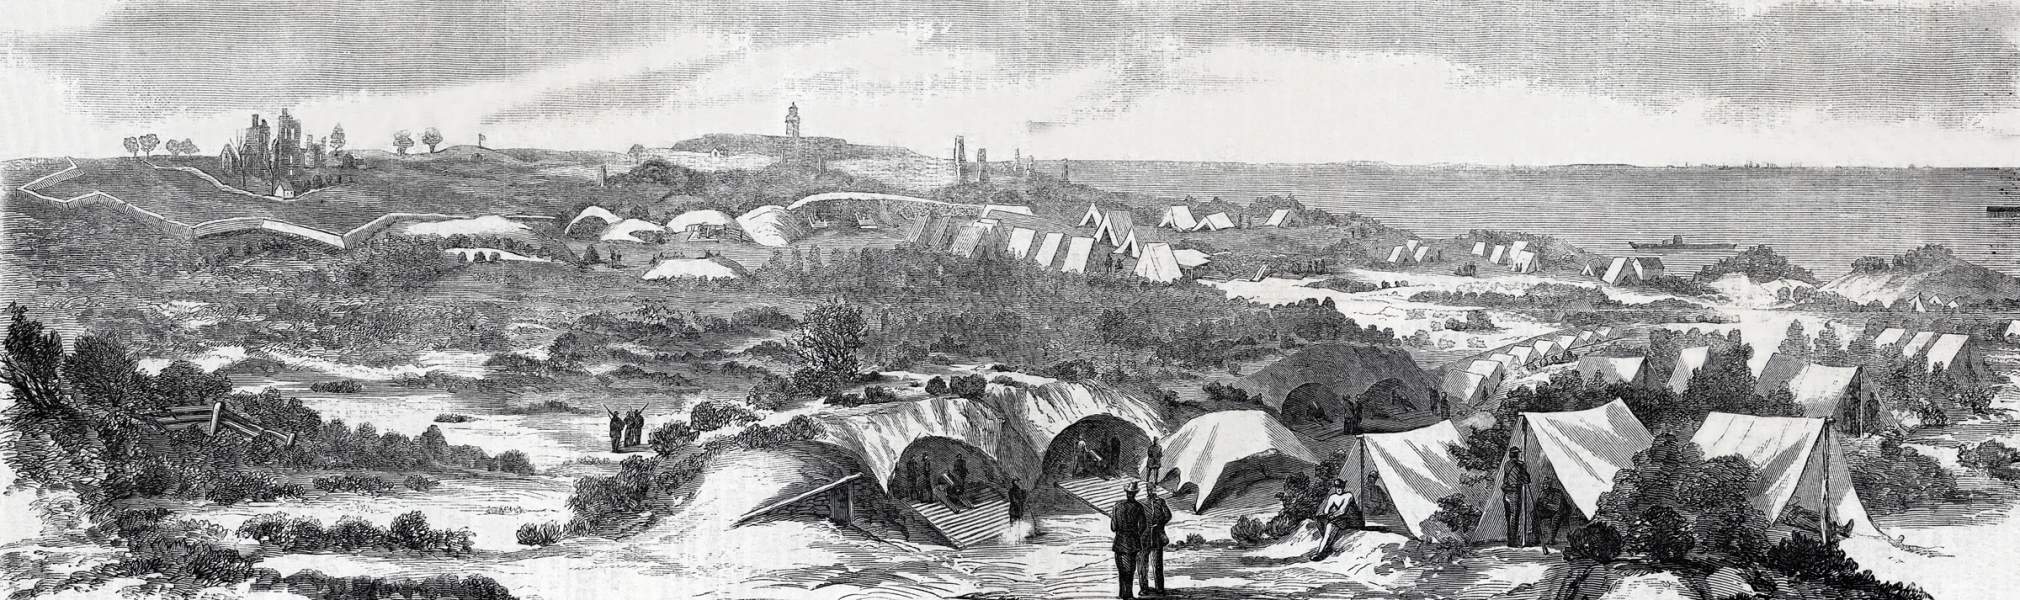 Fort Morgan, Mobile Bay, August, 1864, artist's impression, zoomable image